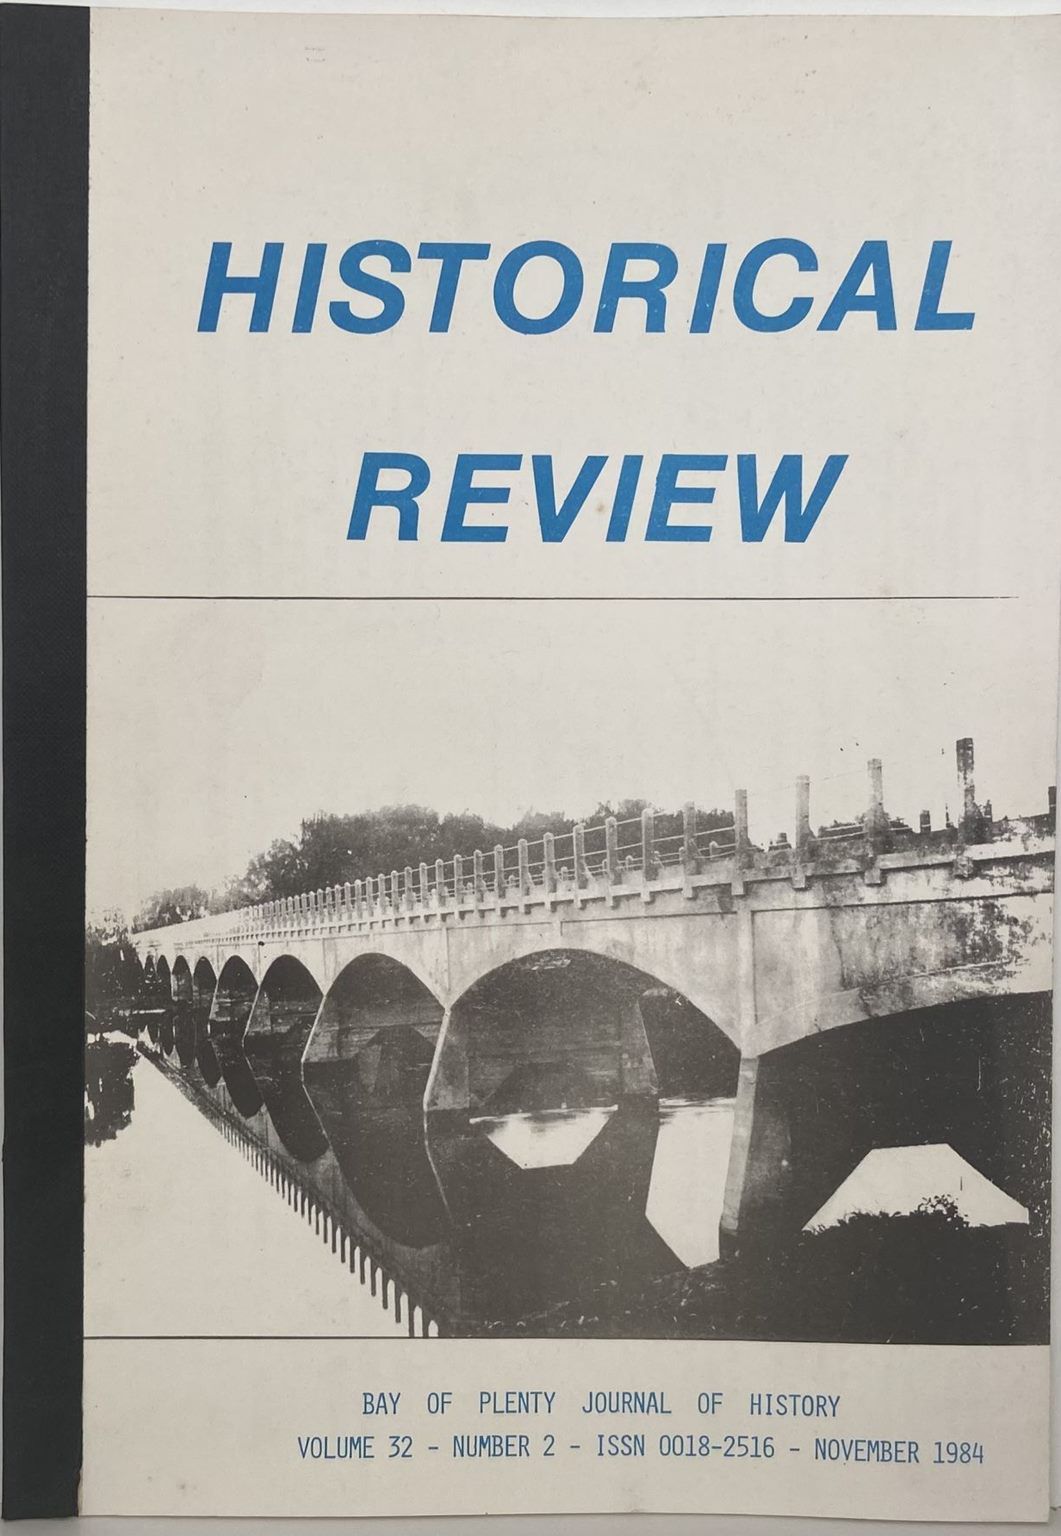 HISTORICAL REVIEW: Bay of Plenty Journal of History - Volume 32, Number 2